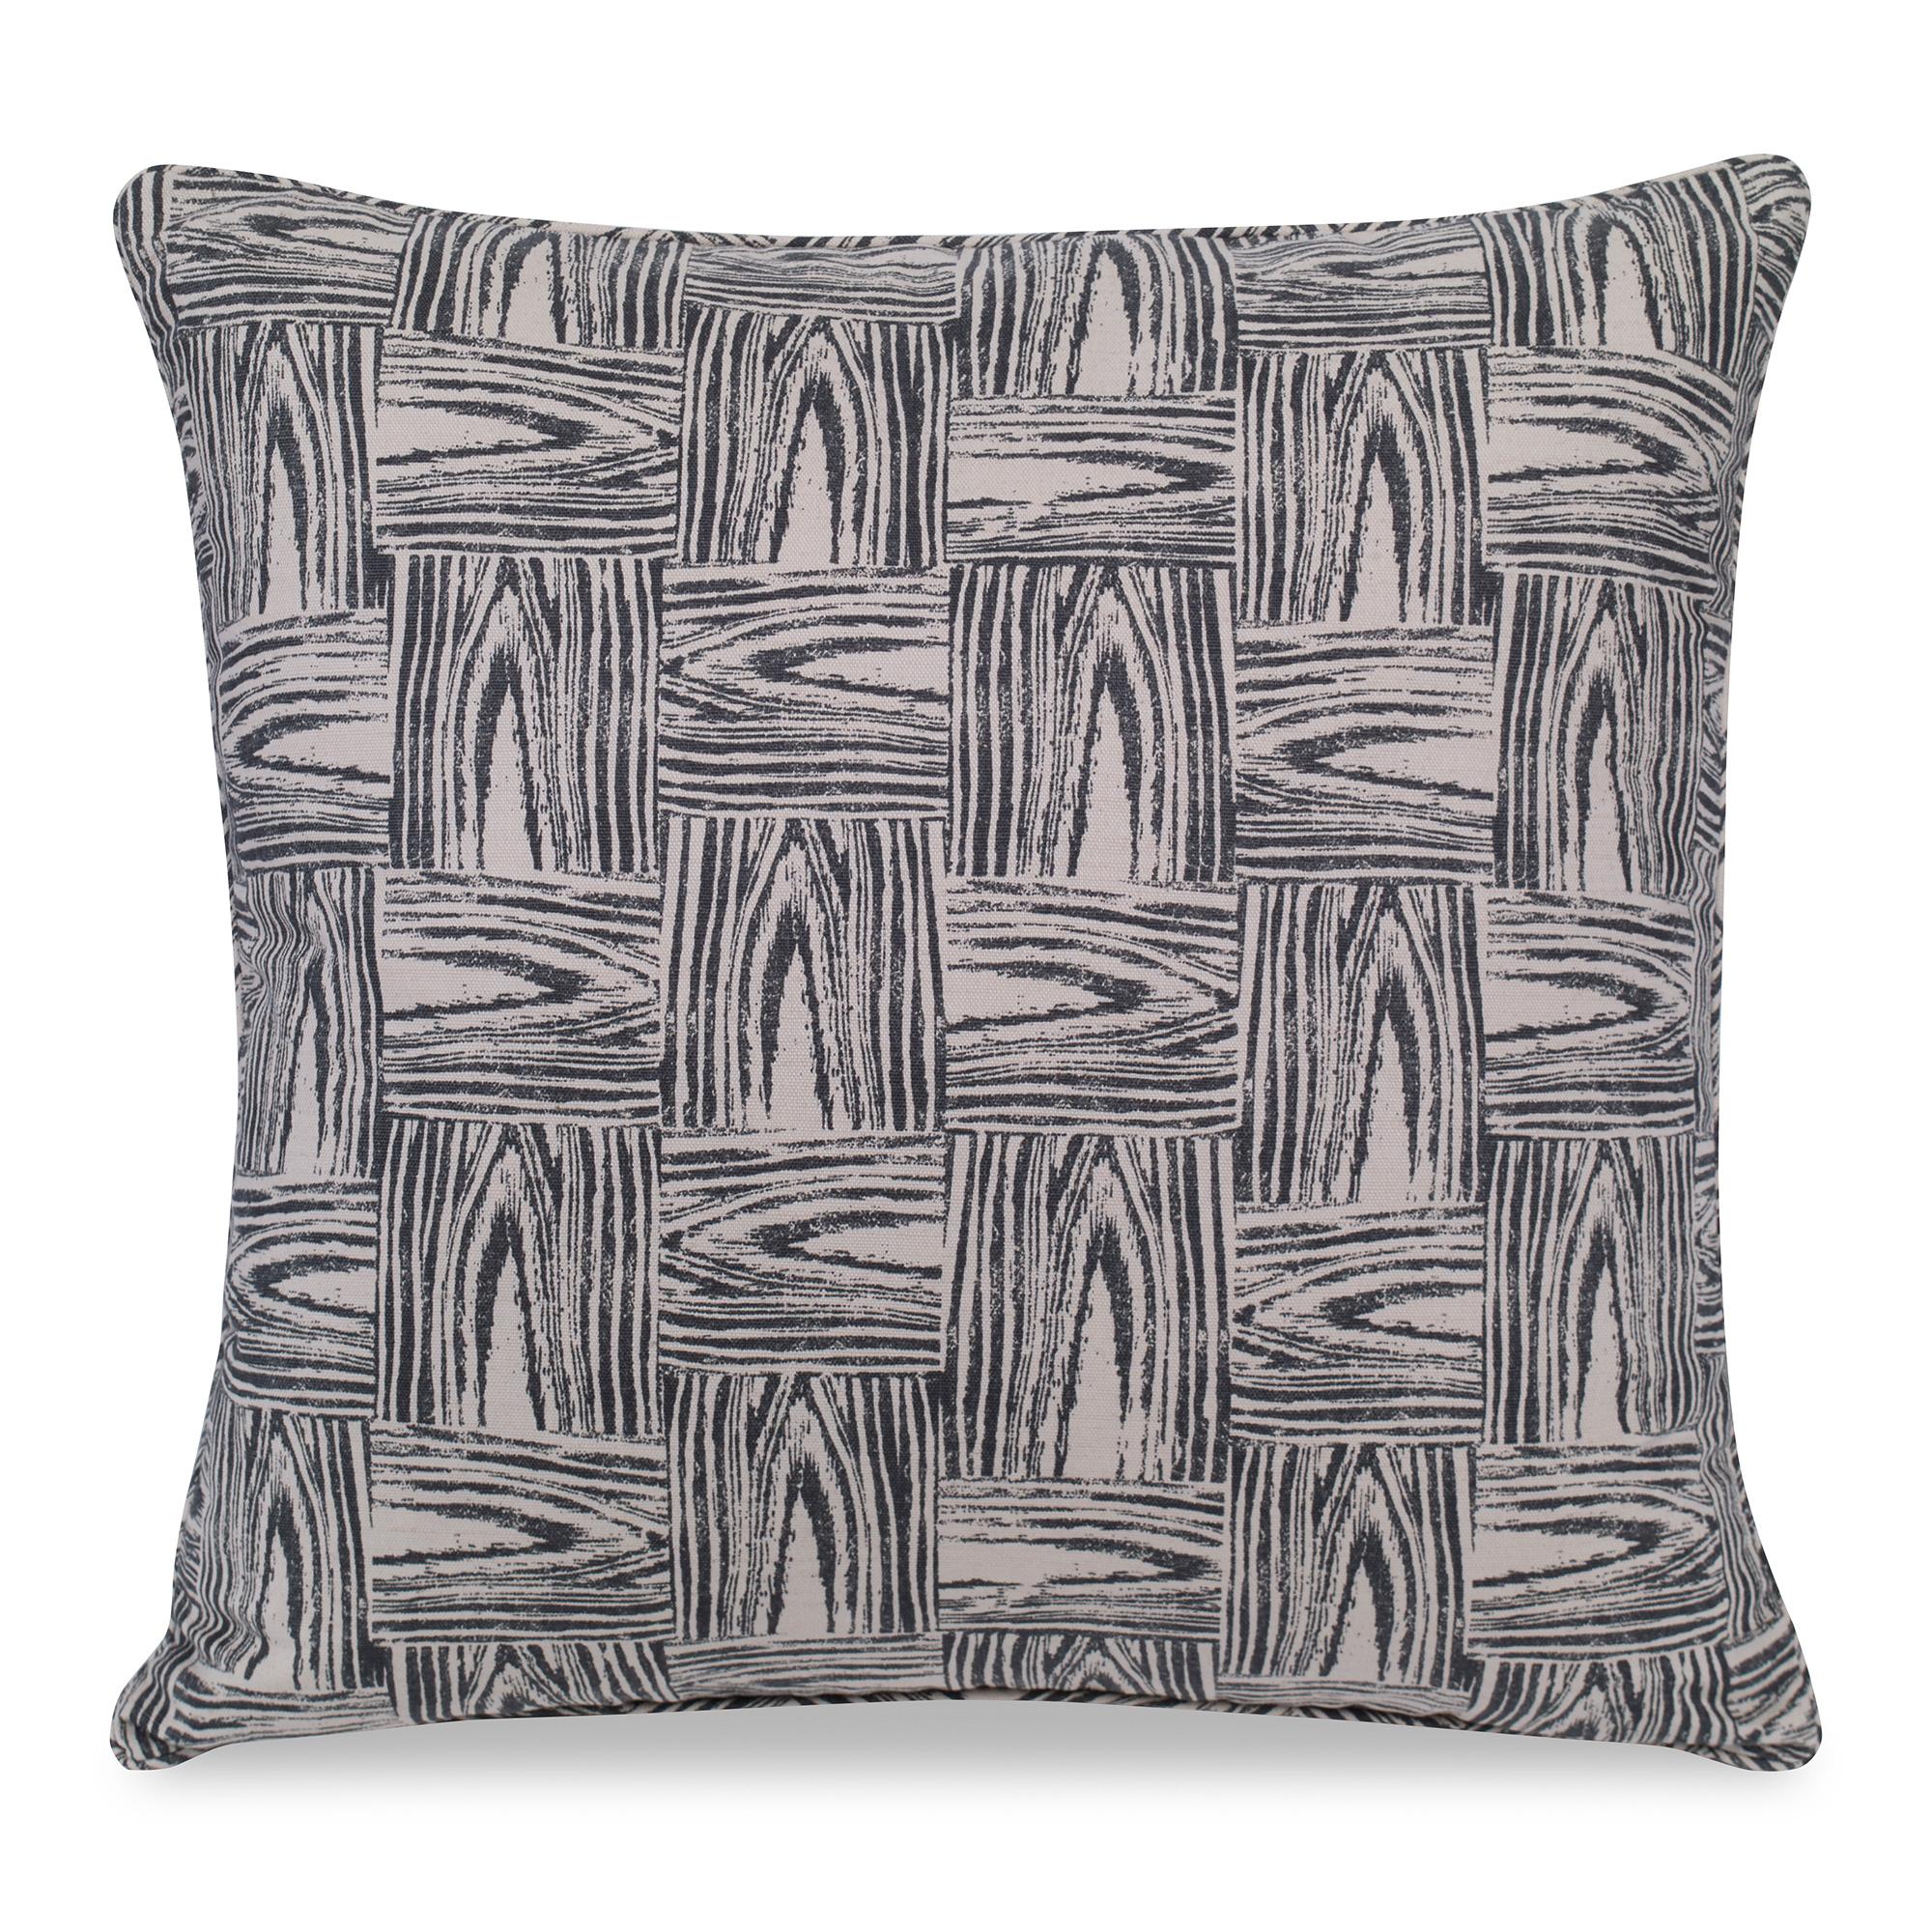 For Sale: Black (QR-20202.BLACK.0) Timberline Decorative Accent Pillow by CuratedKravet